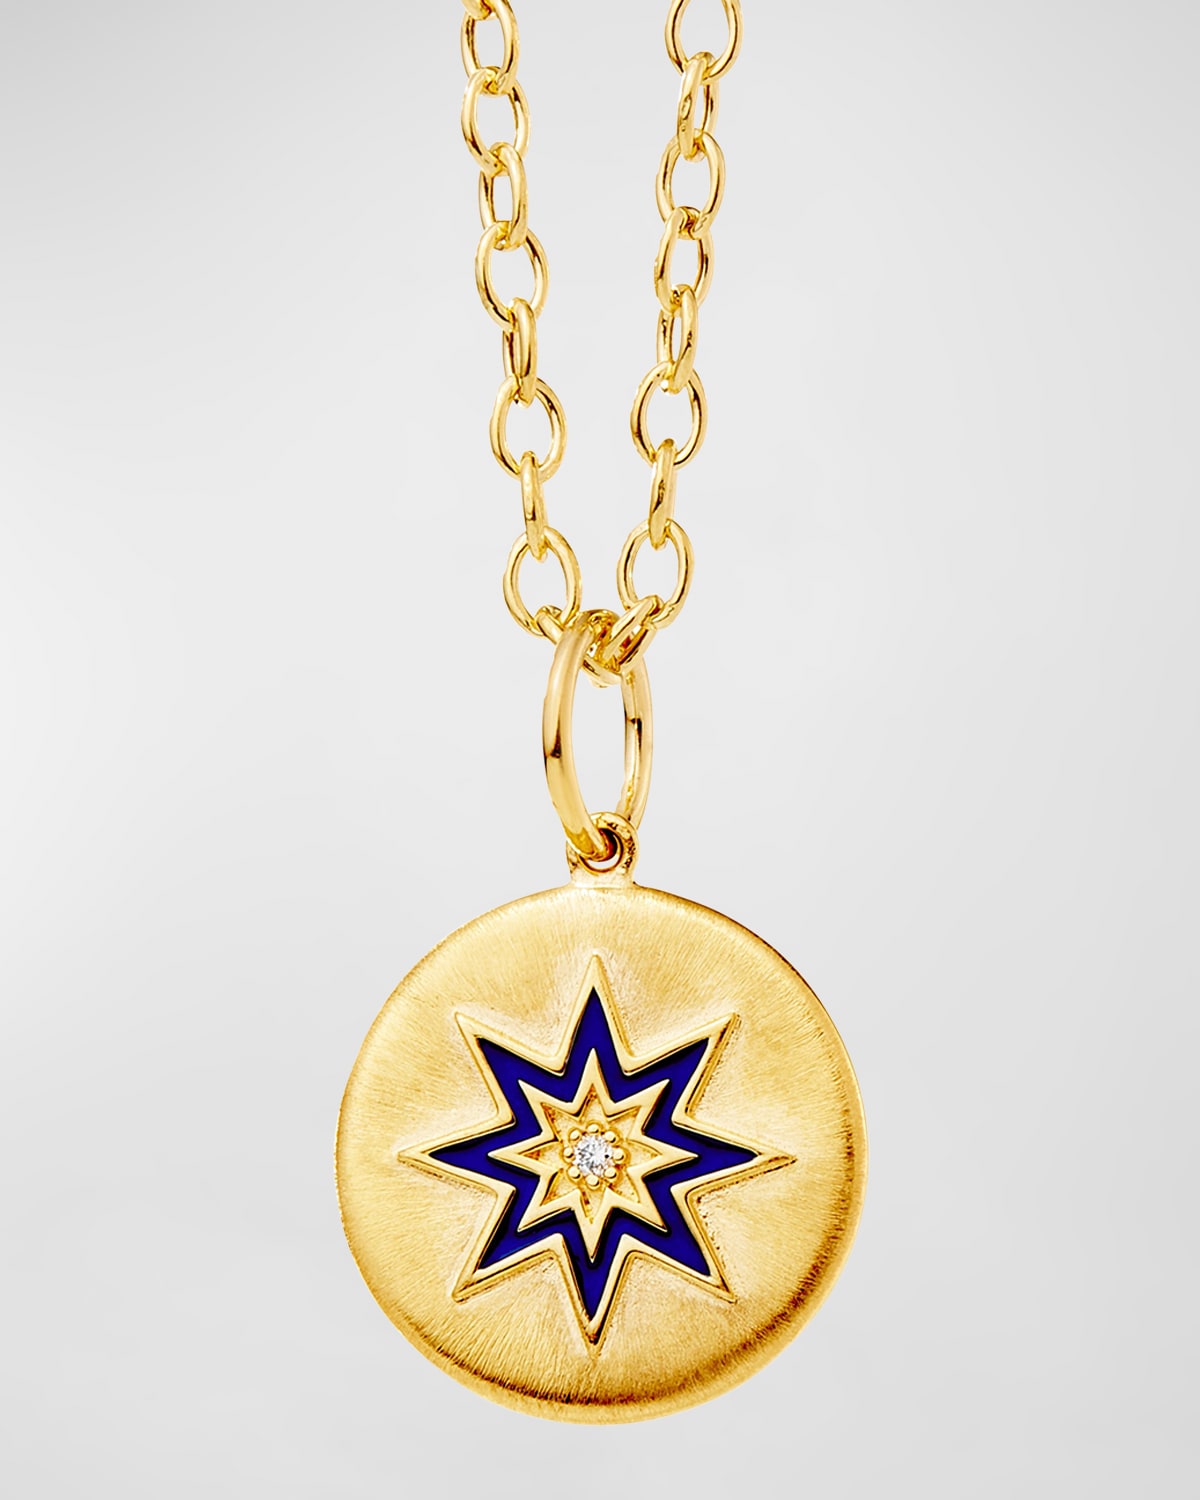 SYNA 18K YELLOW GOLD COSMIC NORTH STAR PENDANT NECKLACE WITH LAPIS ENAMEL AND DIAMOND